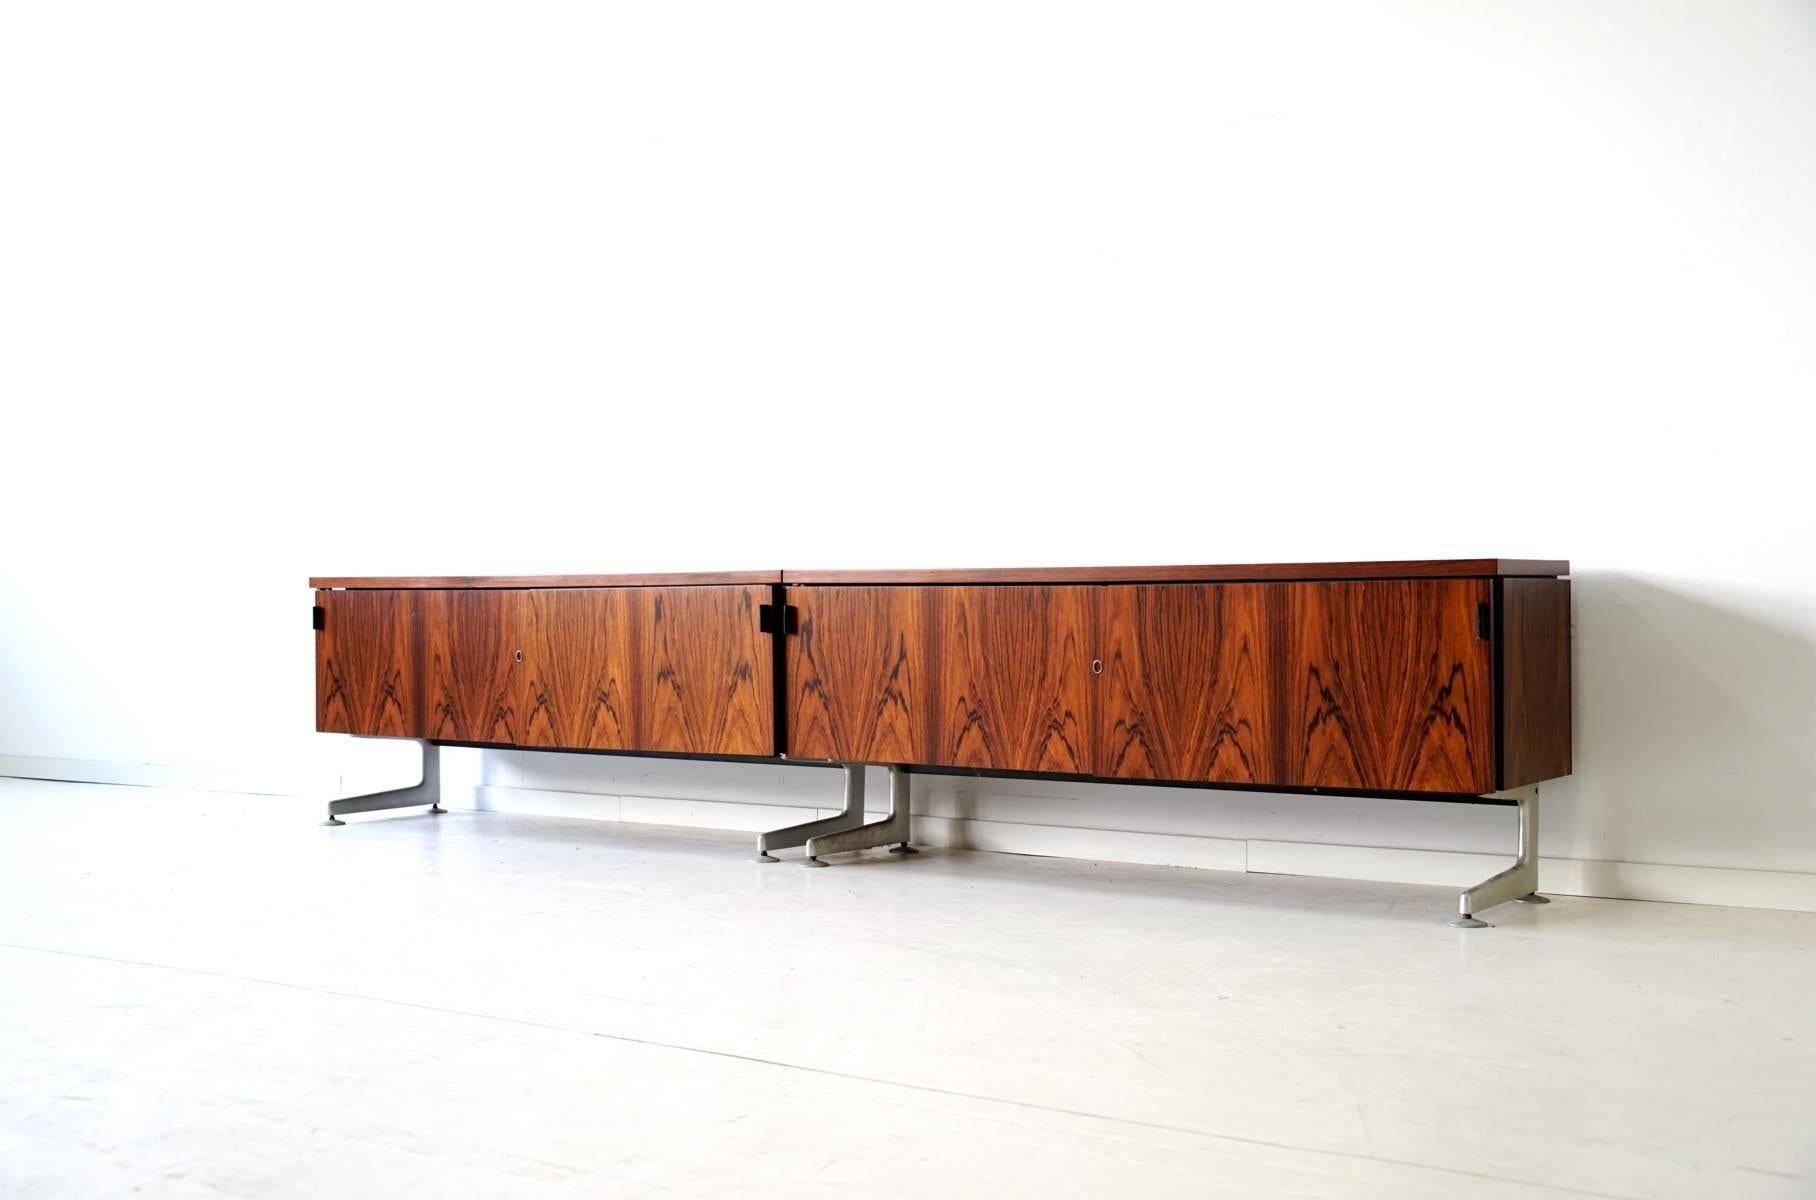 VOKO sideboard midcentury credenza diplomat
Very interesting designed sideboard with two sliding doors and leather holds. Lockable. Beautiful wood and light designed chrome base. The elegant sideboards are very high-quality processed. They are from